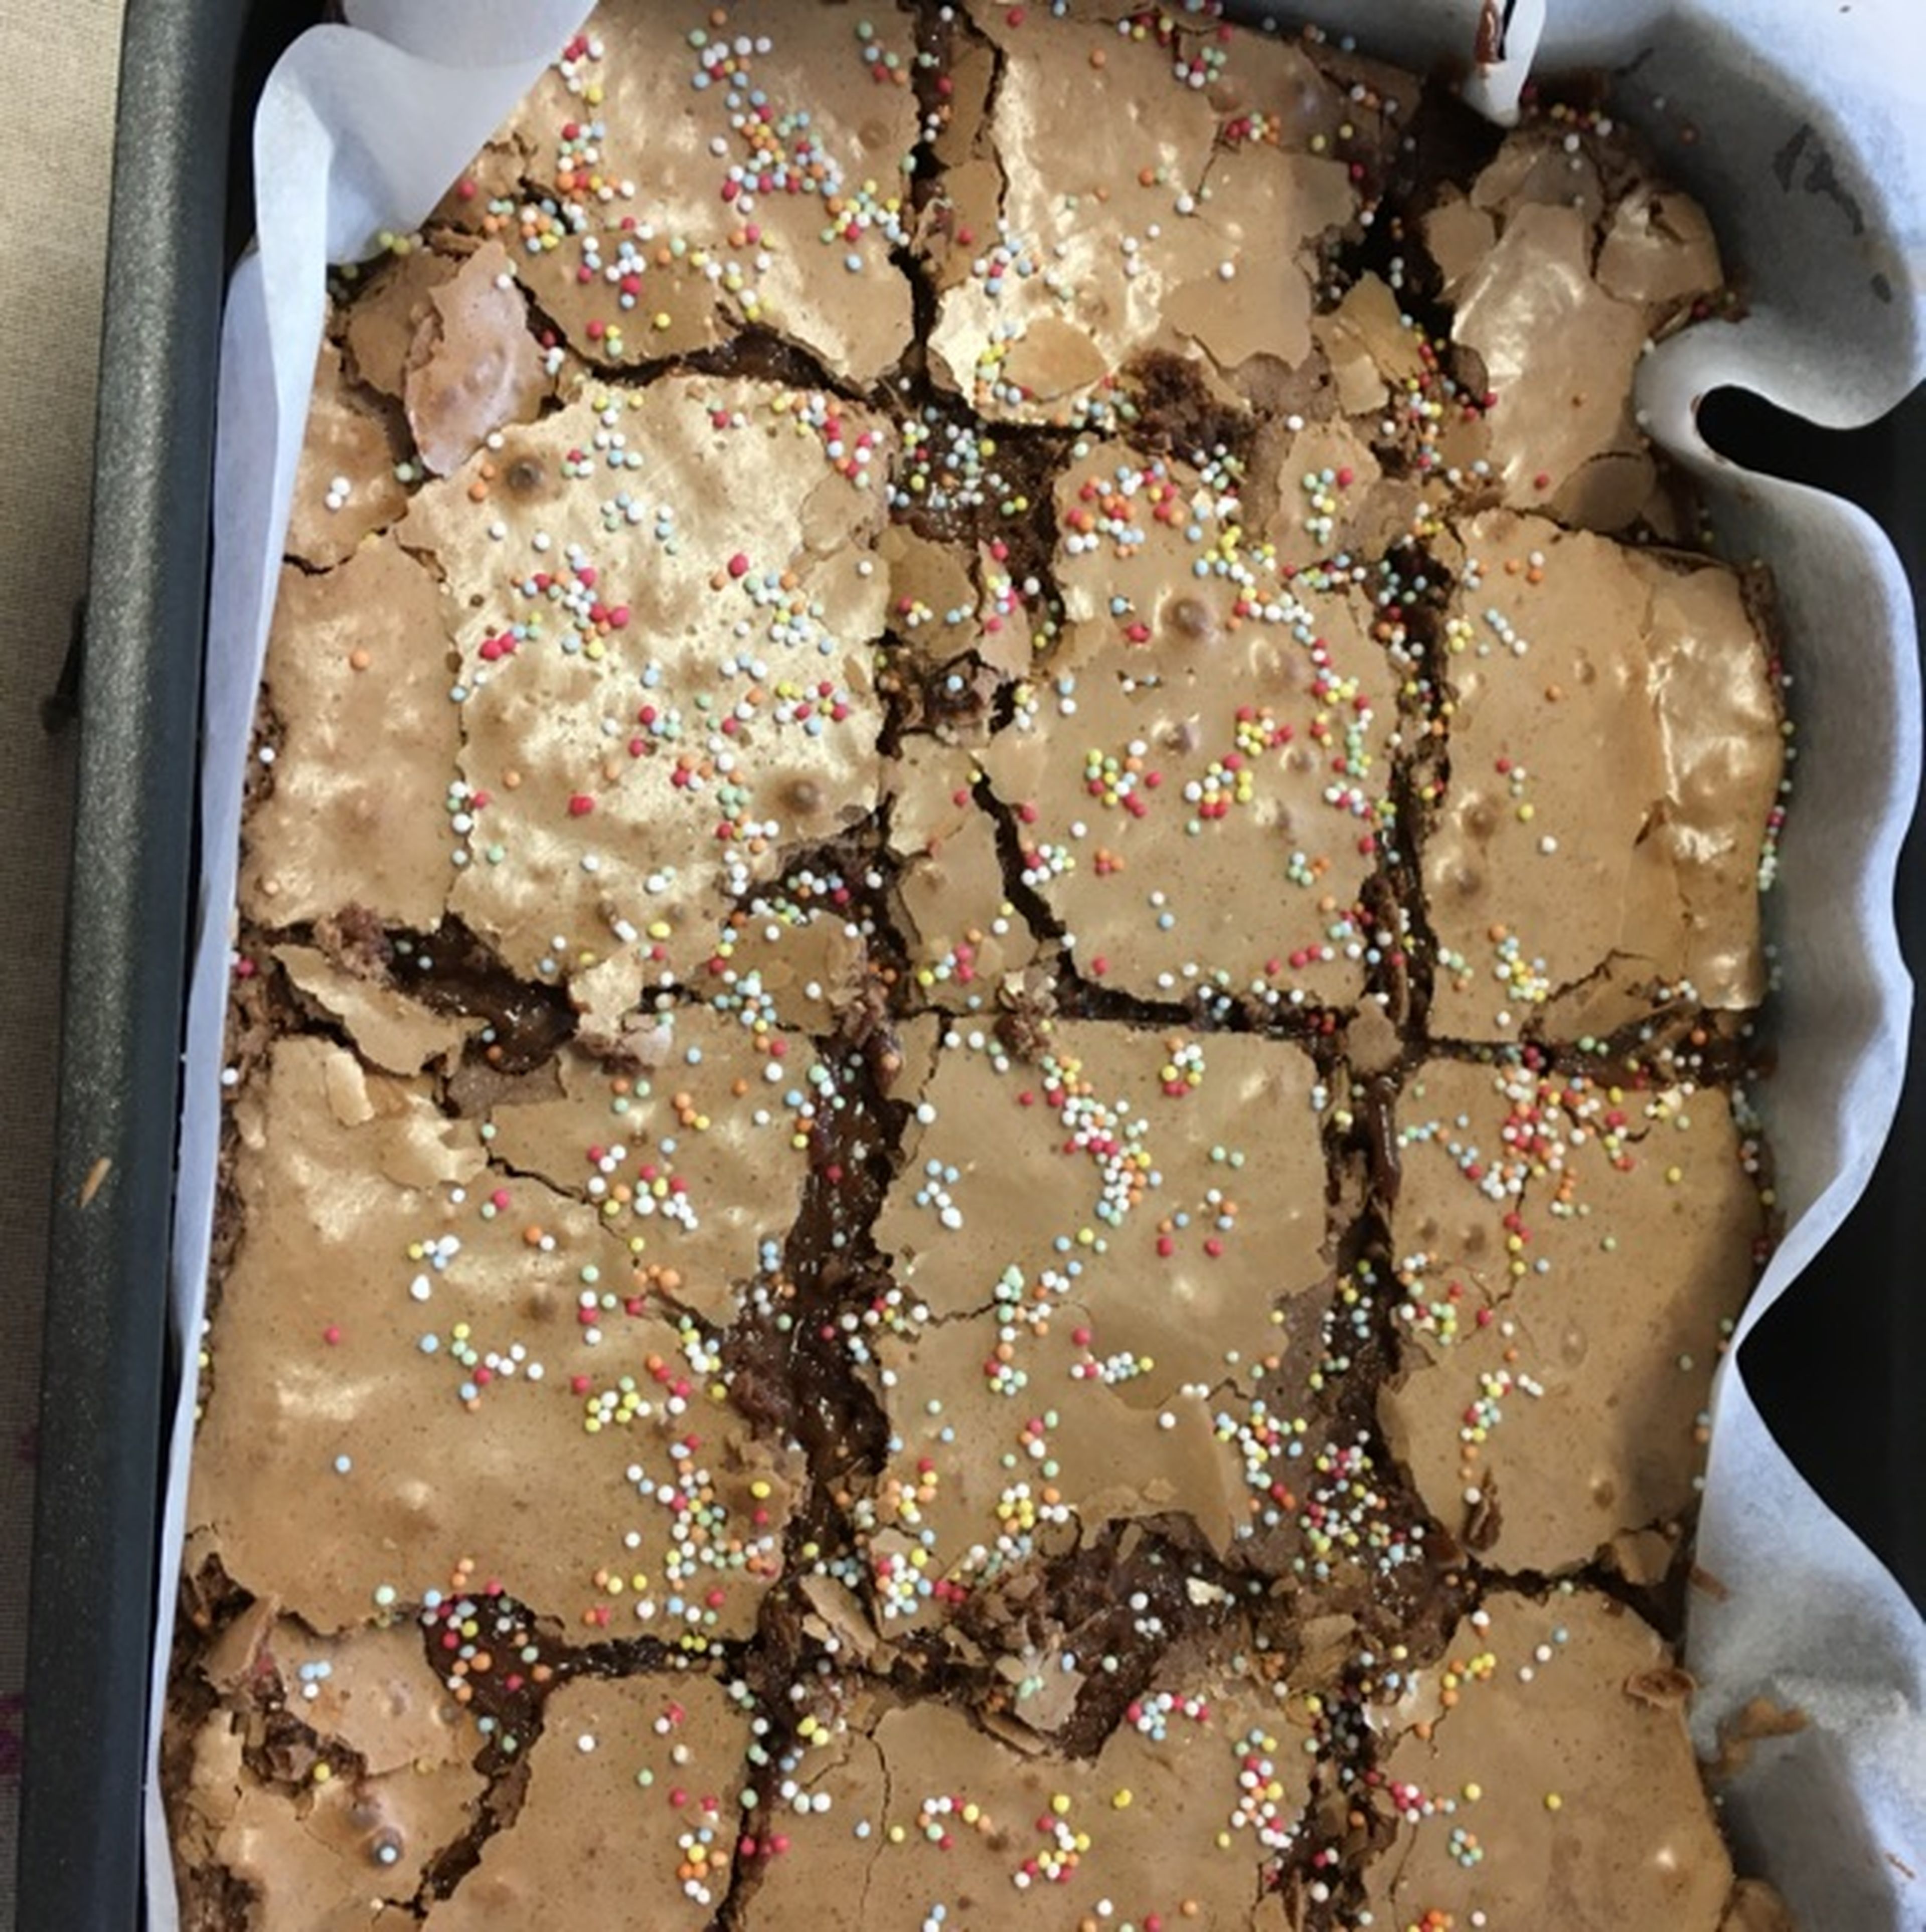 Kids' party chocolate cake with sprinkles